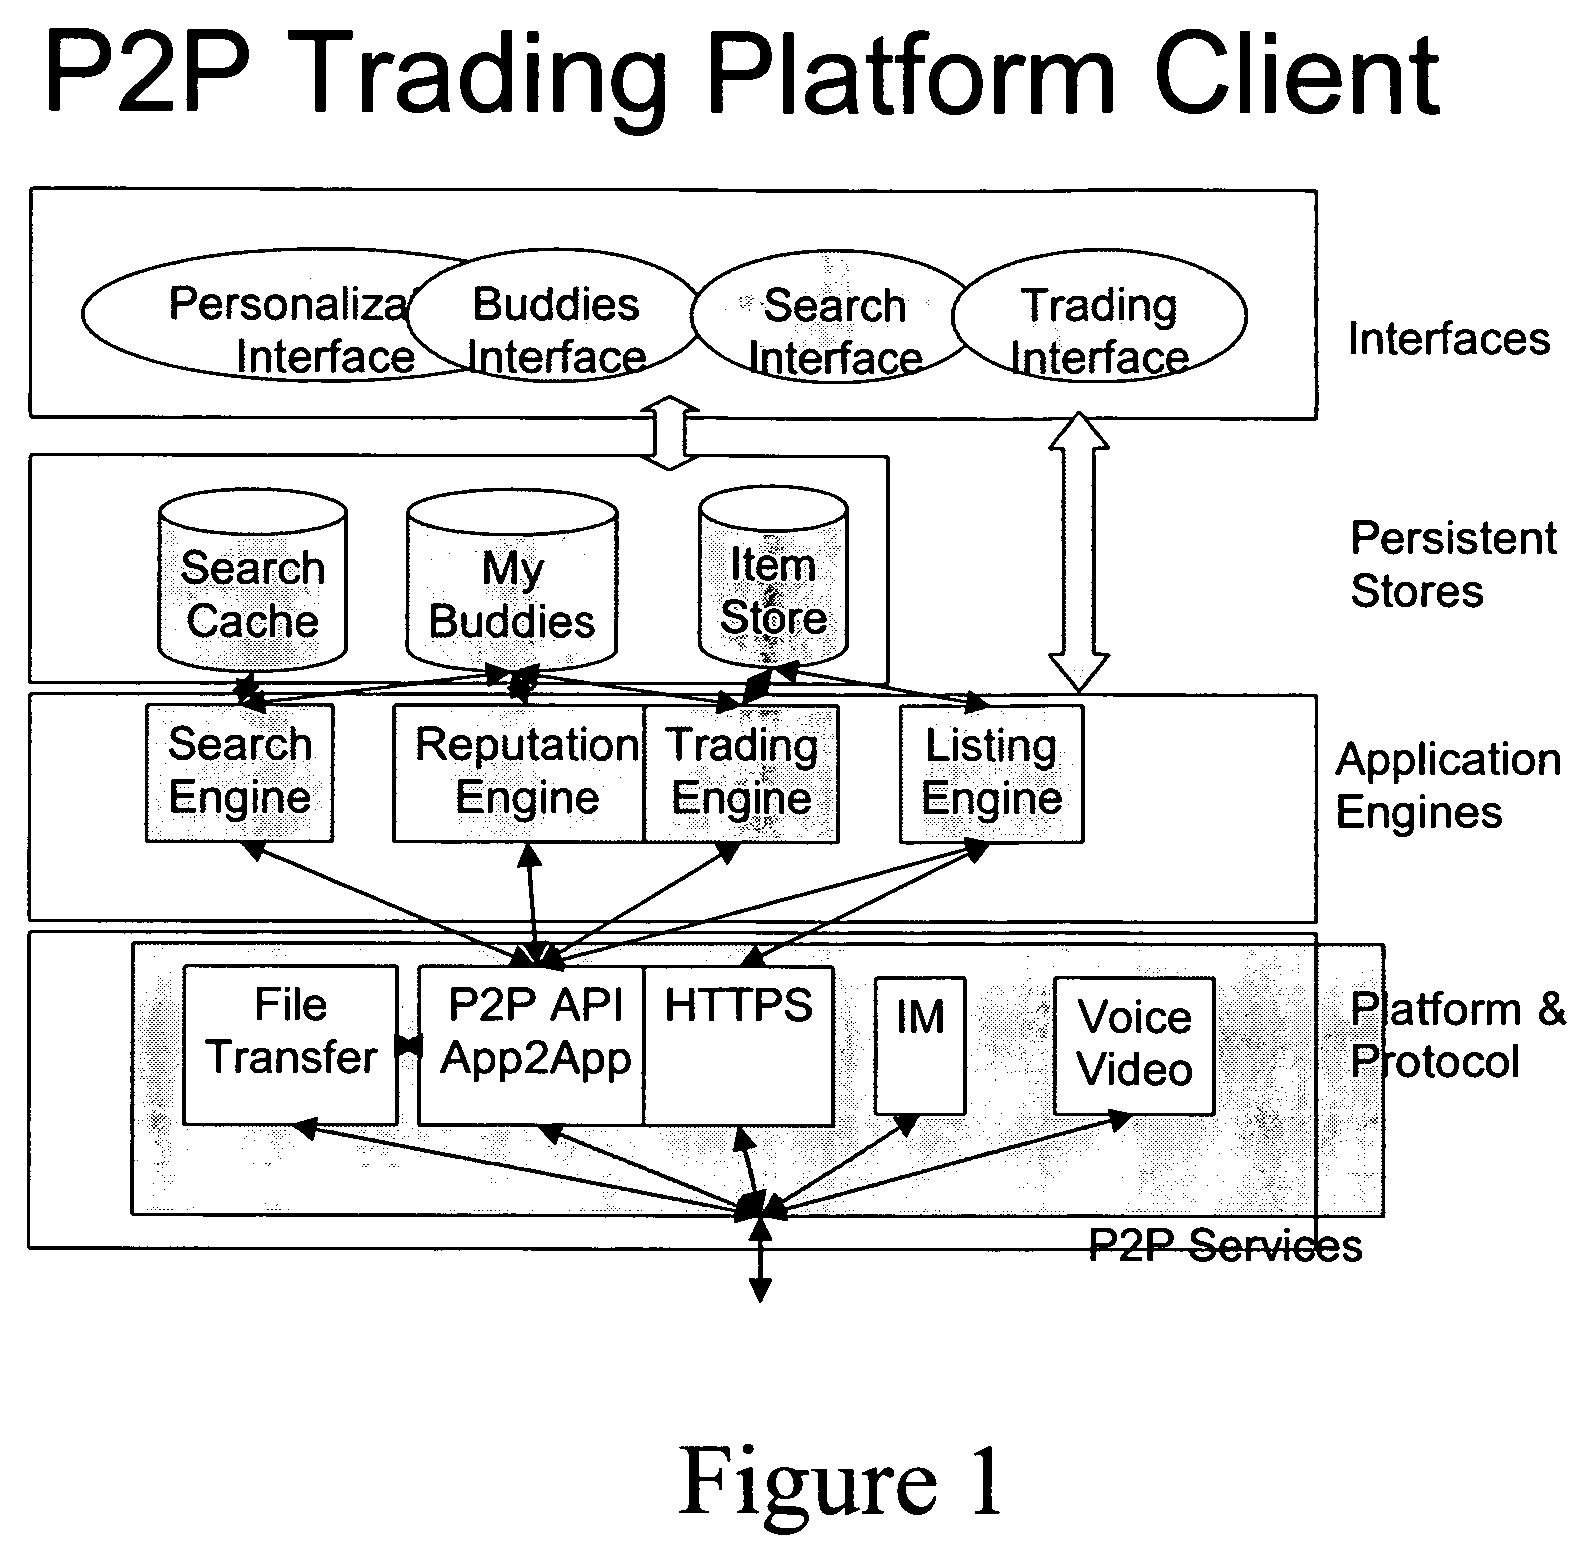 Peer-to-peer trading platform with search caching